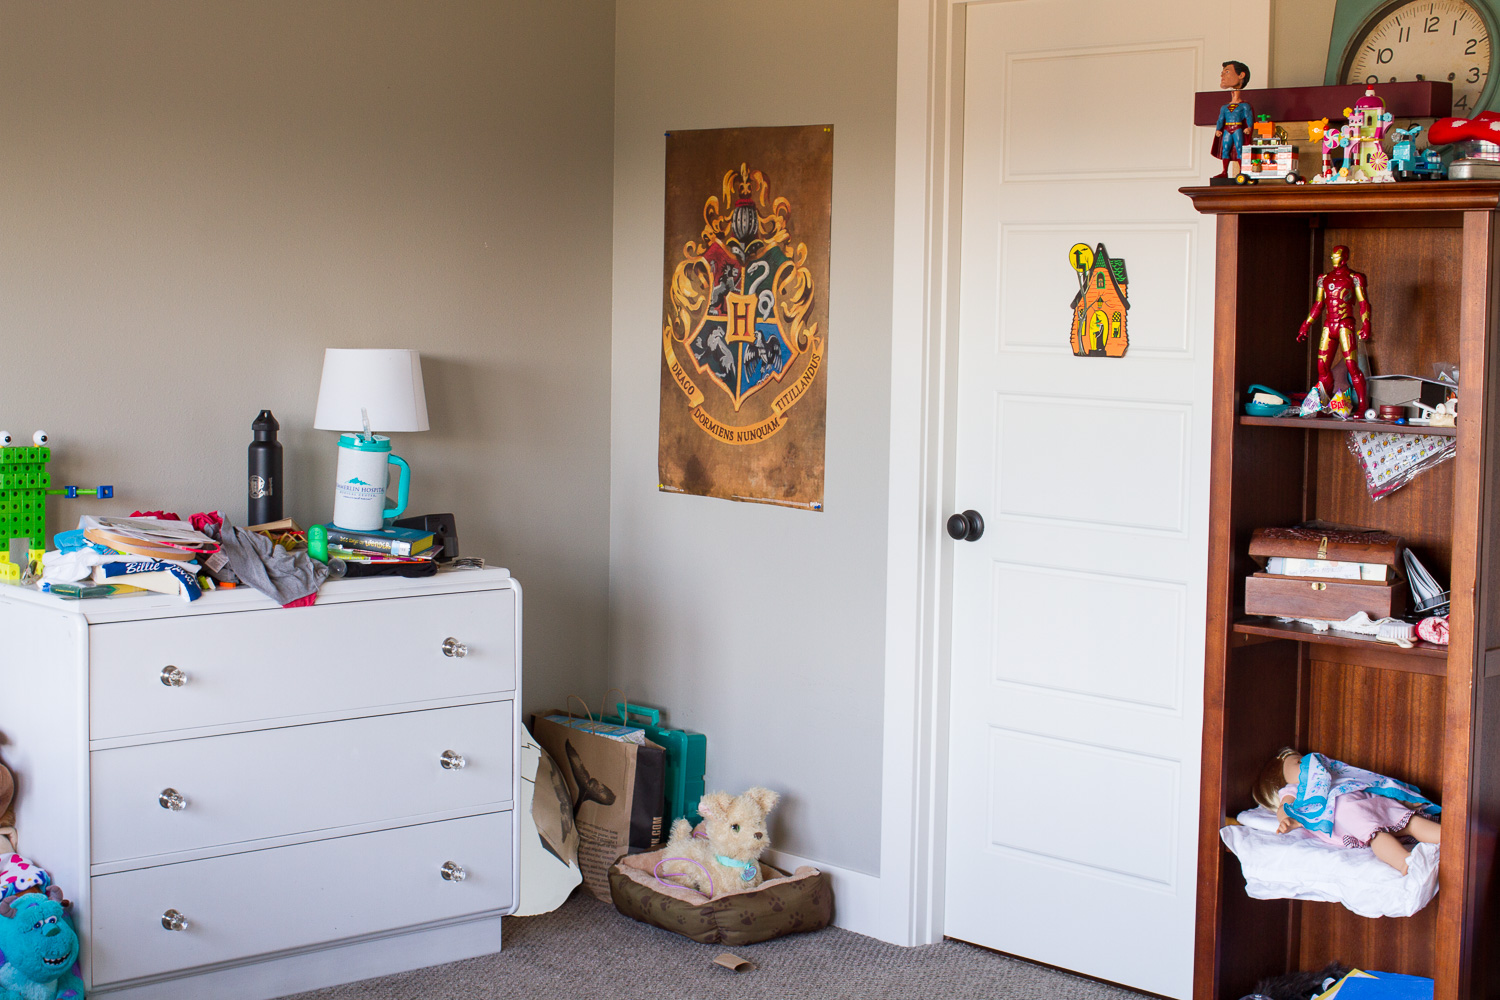 Our One Room Challenge project for Fall 2017 is our oldest daughter's bedroom. These before pictures show how desperately she needs a bedroom makeover!